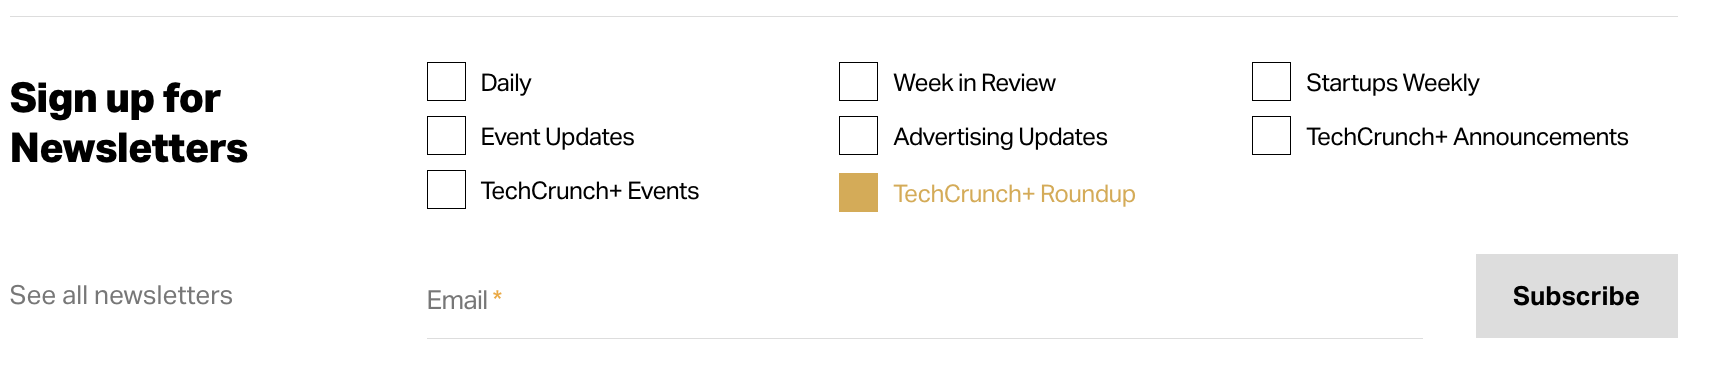 Sign up for the TechCrunch+ digest newsletter